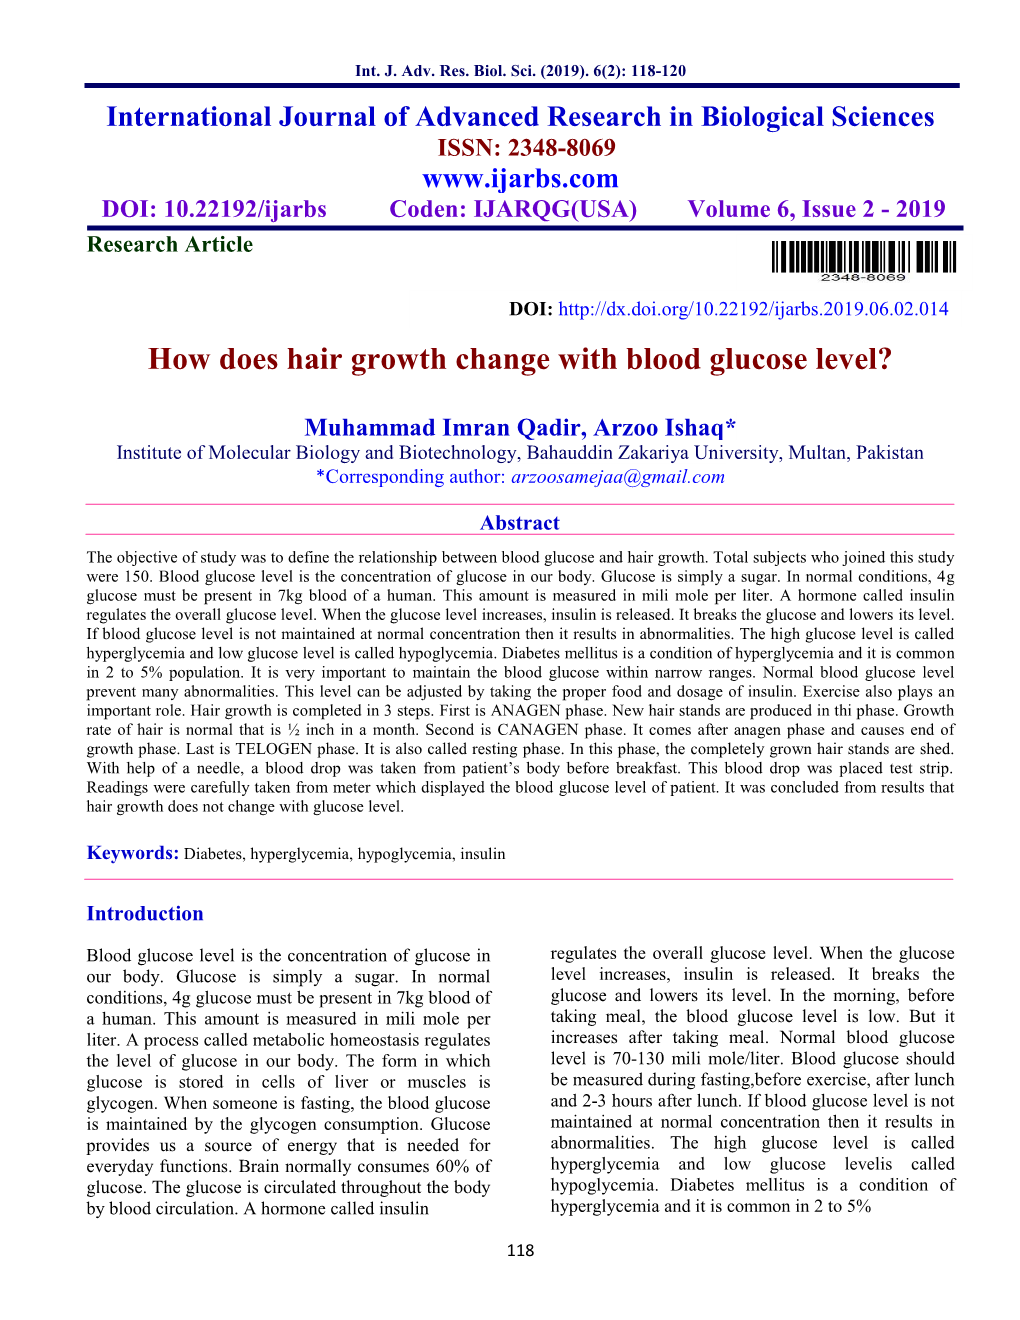 How Does Hair Growth Change with Blood Glucose Level?